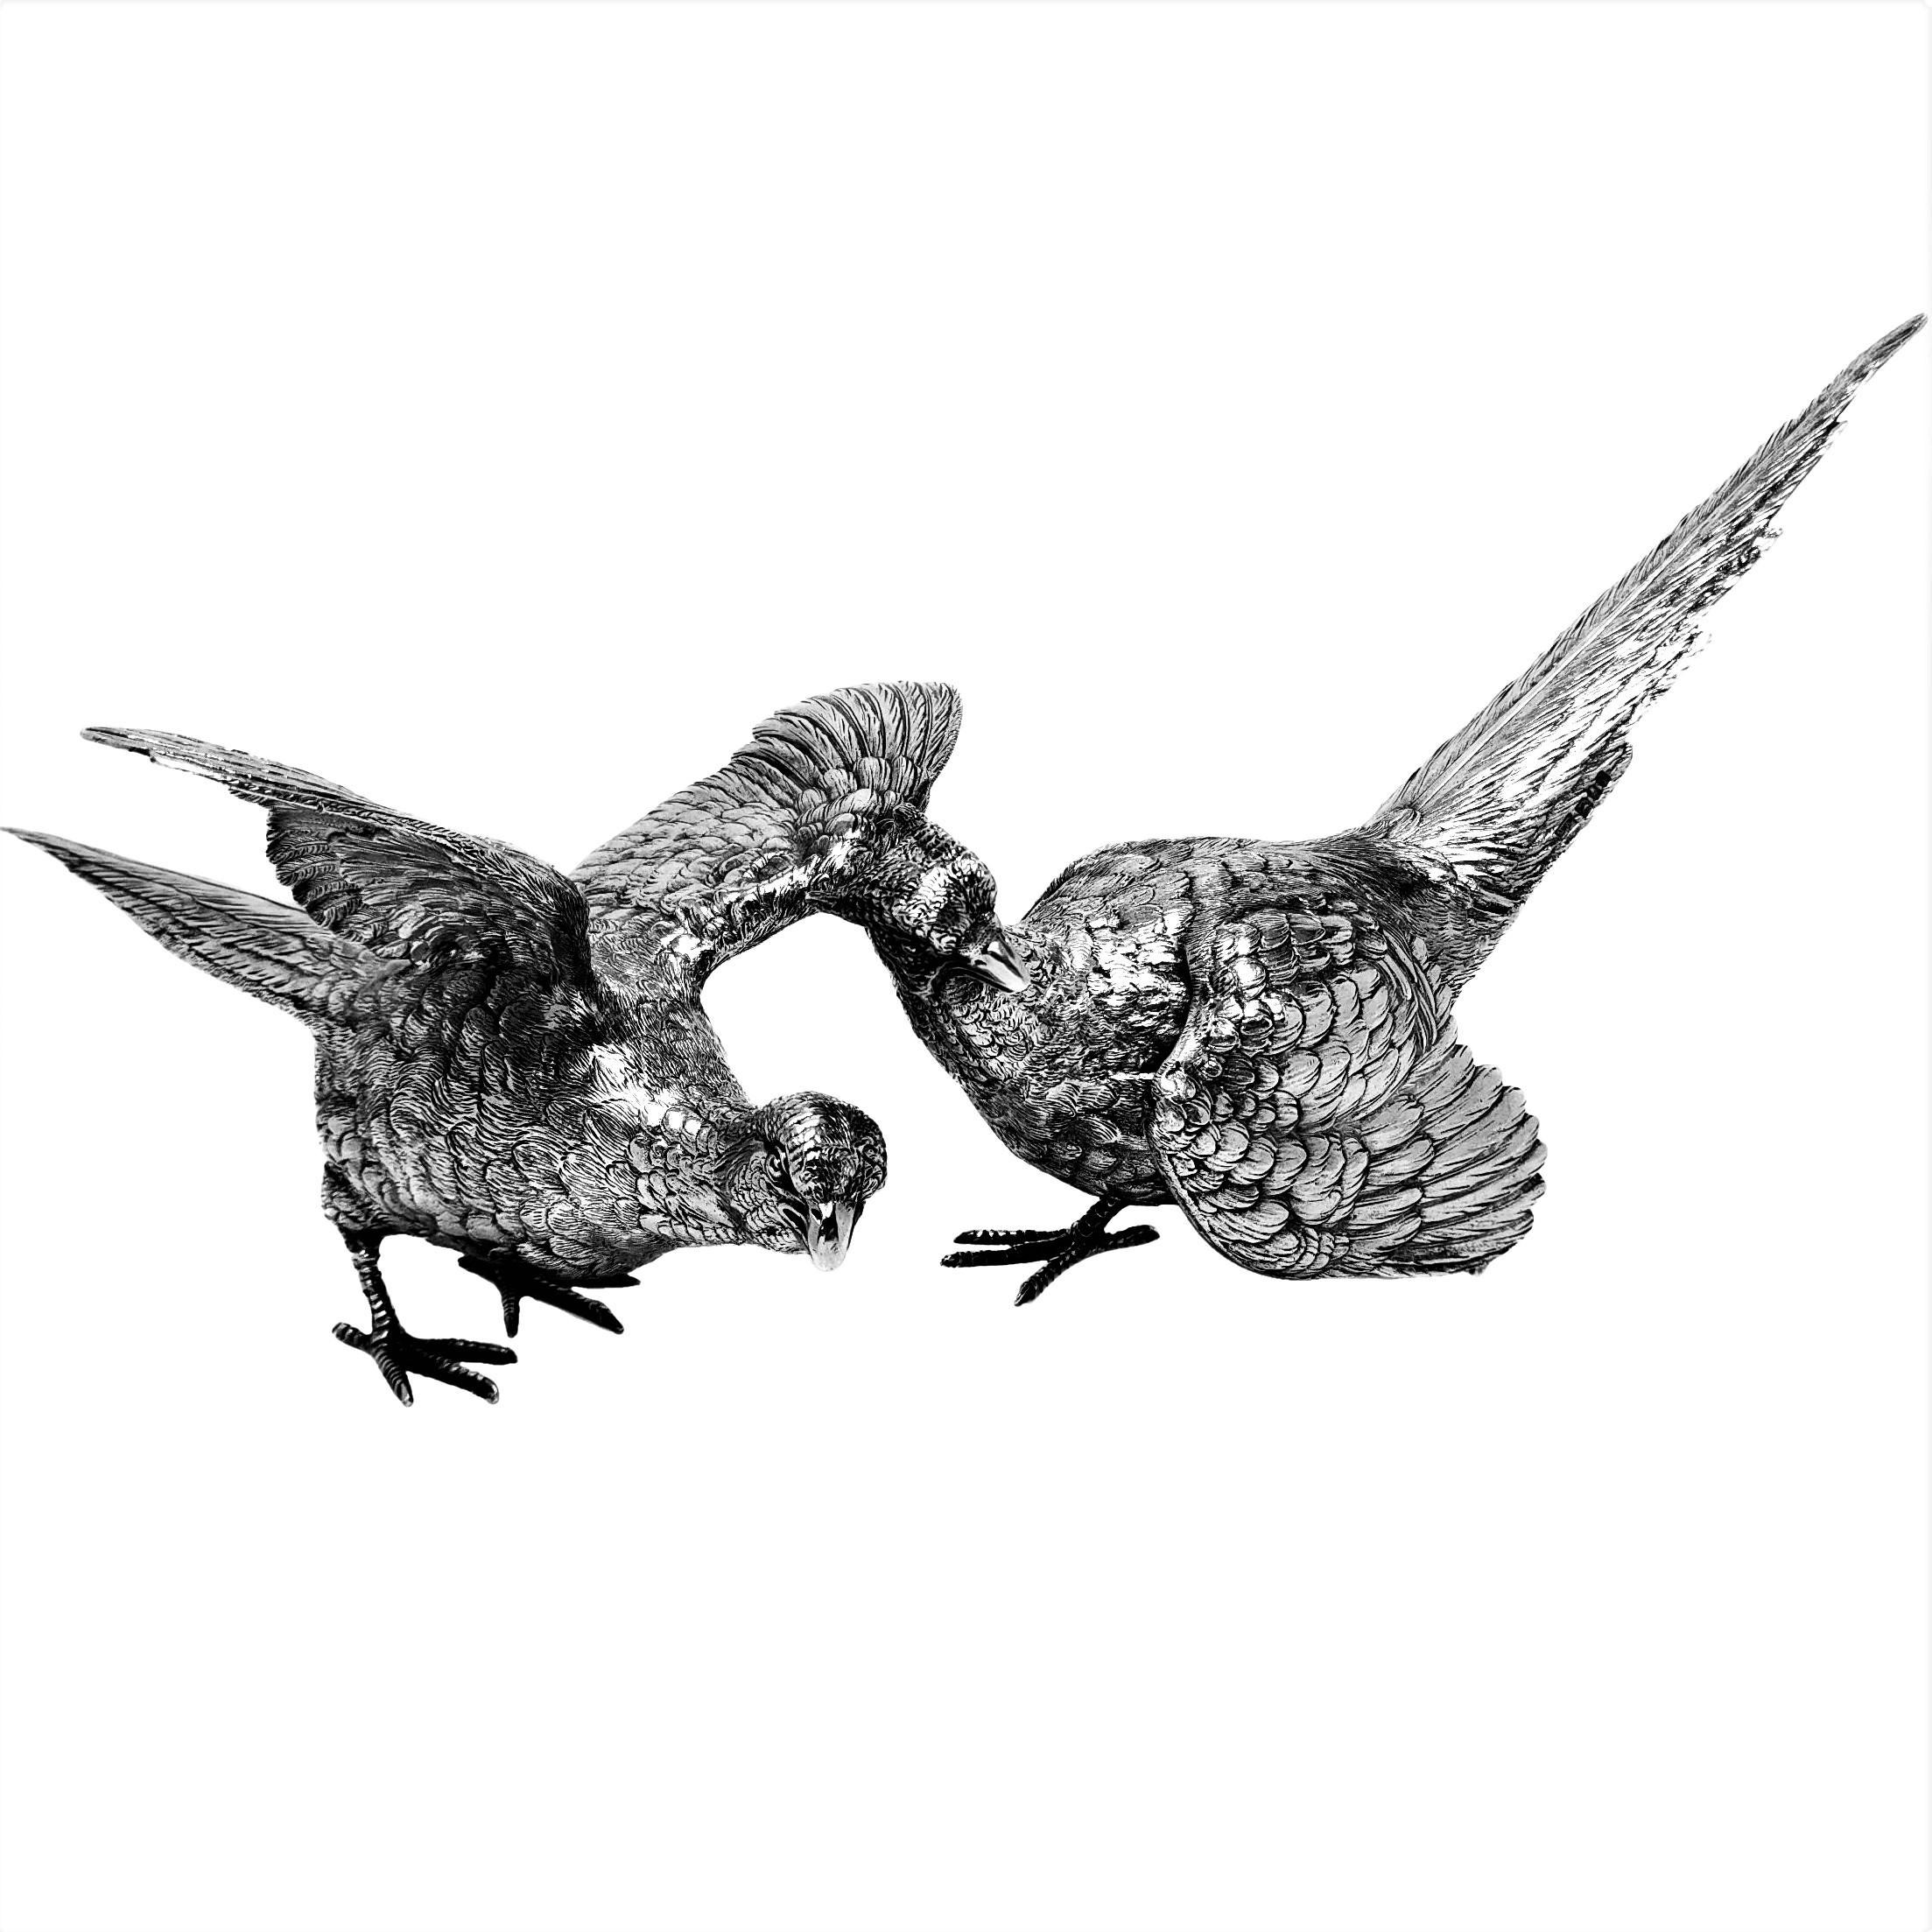 A pair of classic Sterling Silver Pheasants of heavy weight and made with an excellent attention to detail. The Pair of Birds consists of one cock Pheasant and one hen Pheasant.

Made in London in 1976 by Mappin & Webb.

Approx. Weight - 1786g /